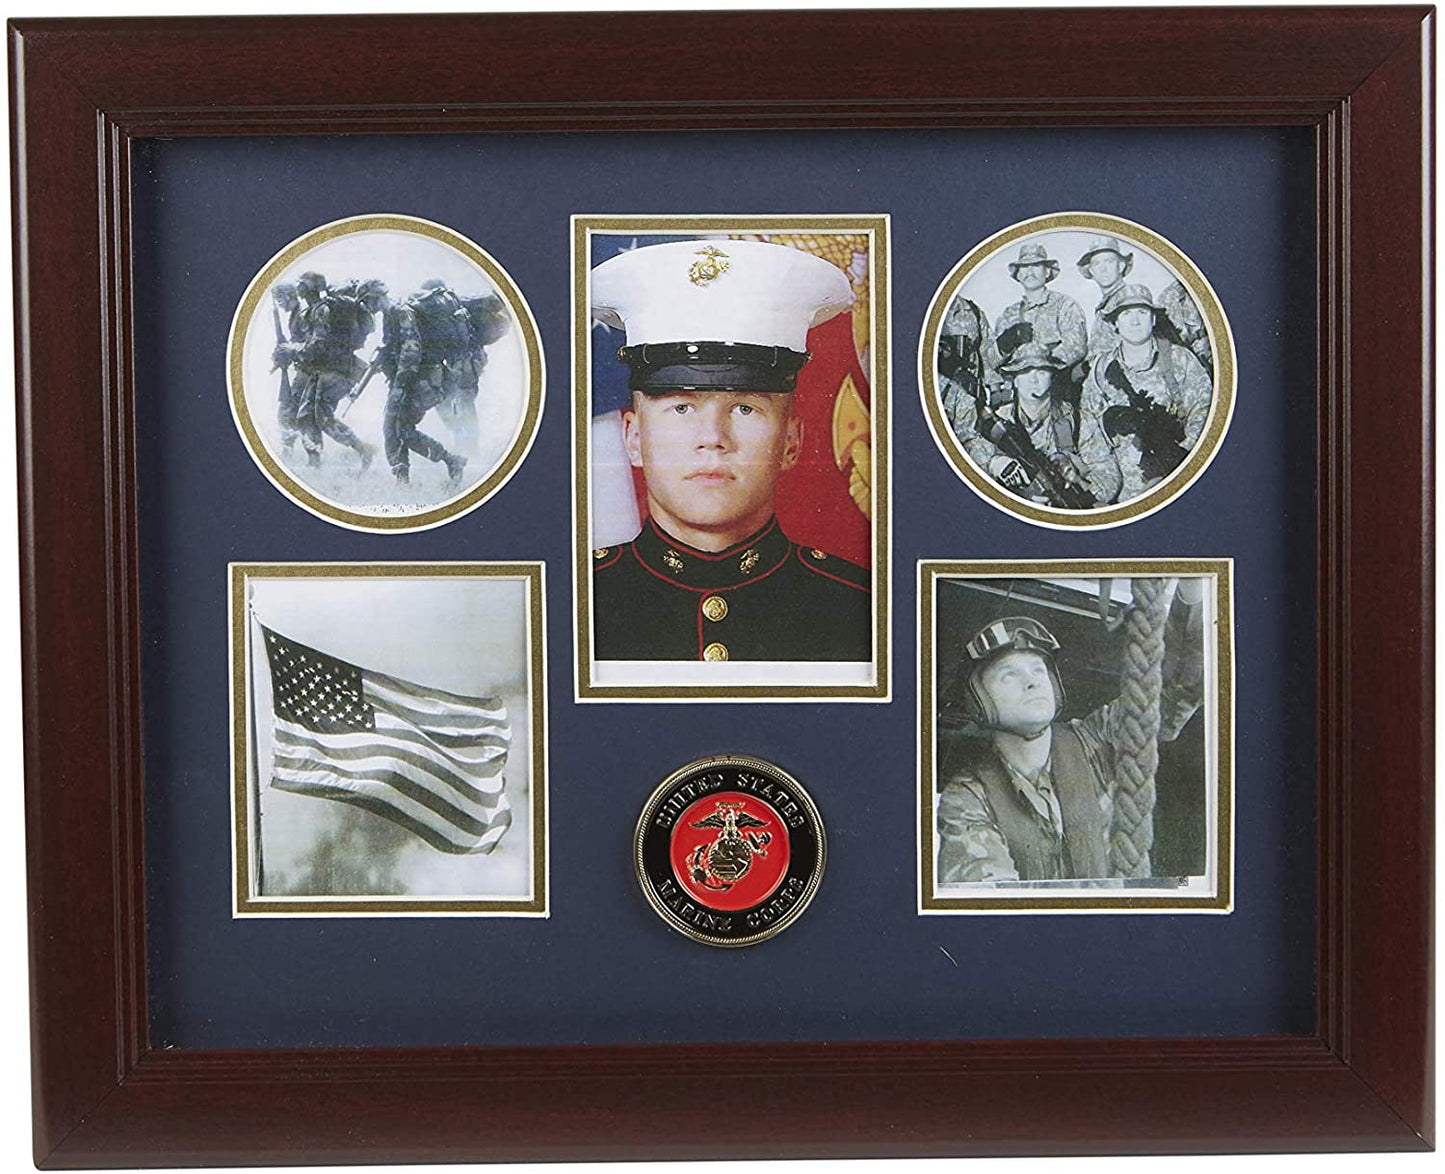 The Military Gift Store United States Marine Corps Medallion 5 Picture Collage Frame with Stars. by The Military Gift Store